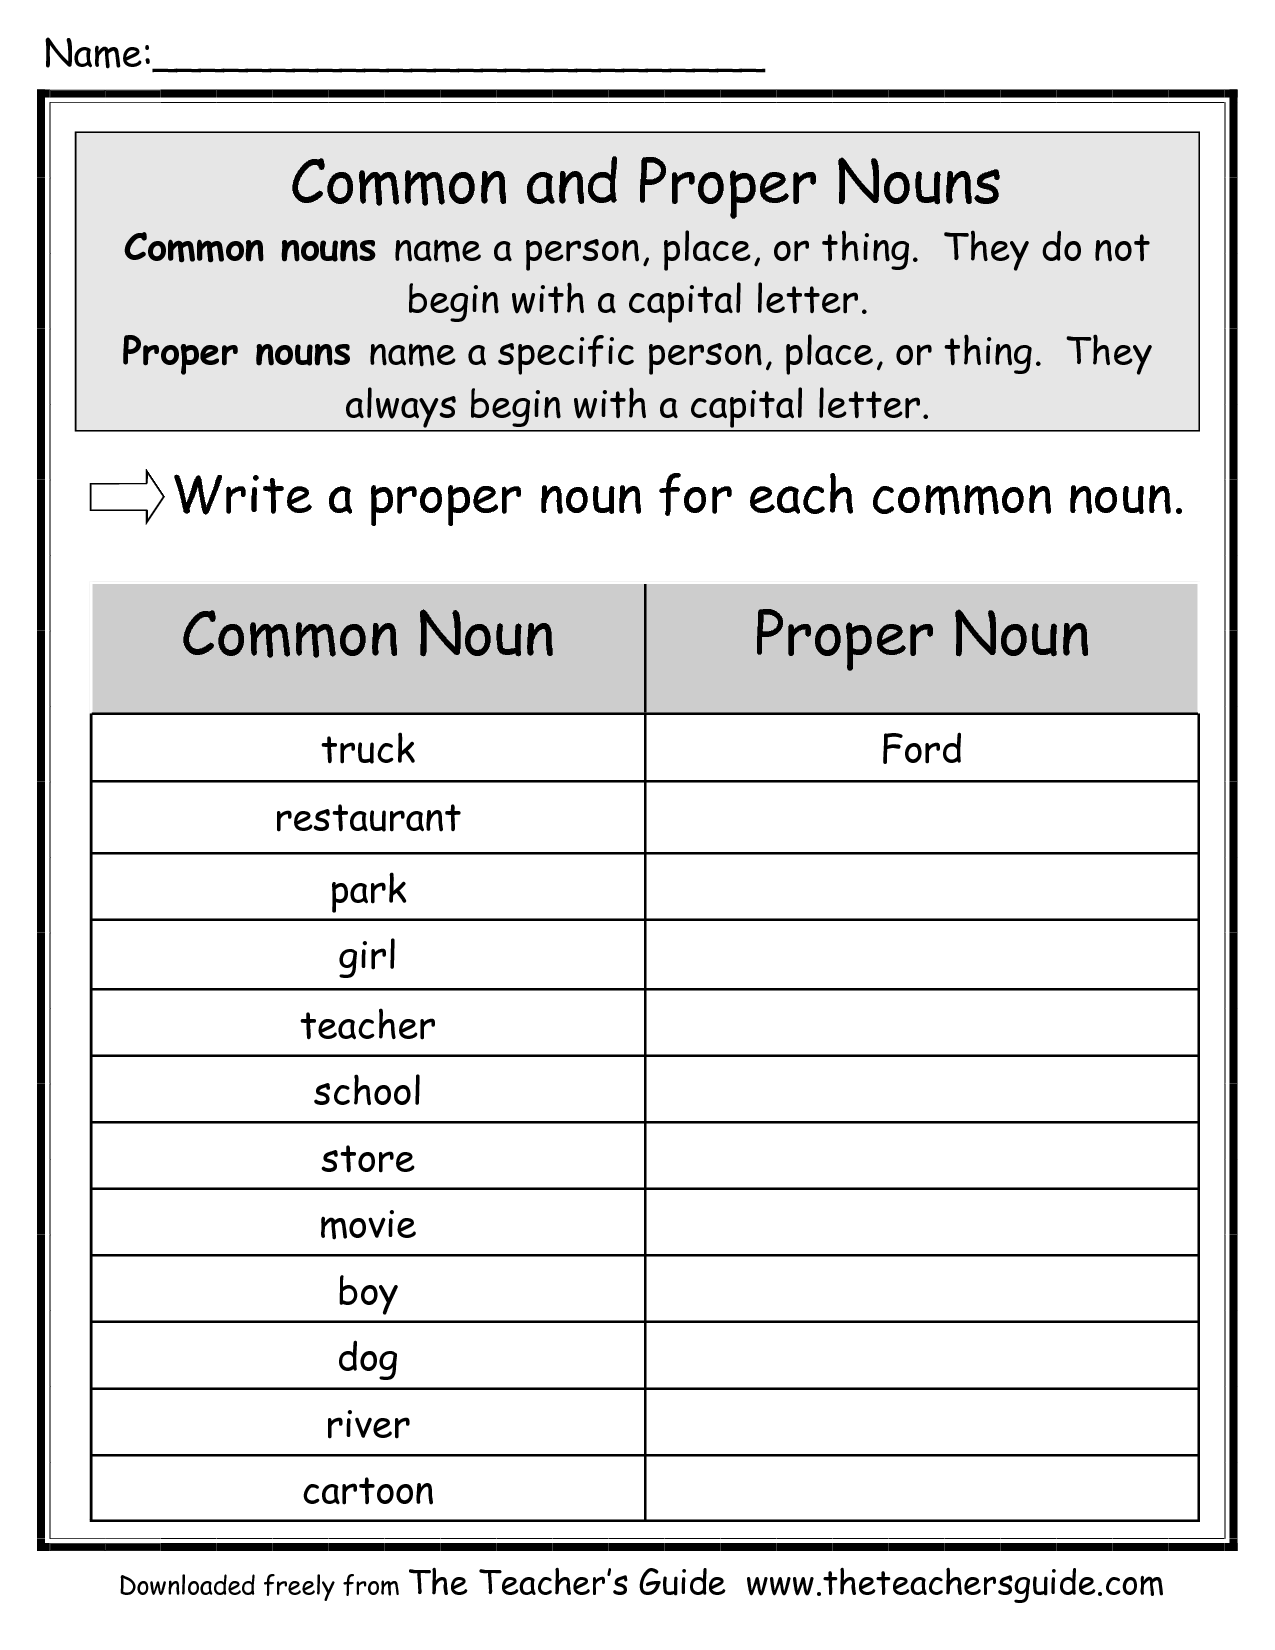 13 Best Images Of Common And Proper Nouns Worksheets Common And Proper Noun Worksheet First